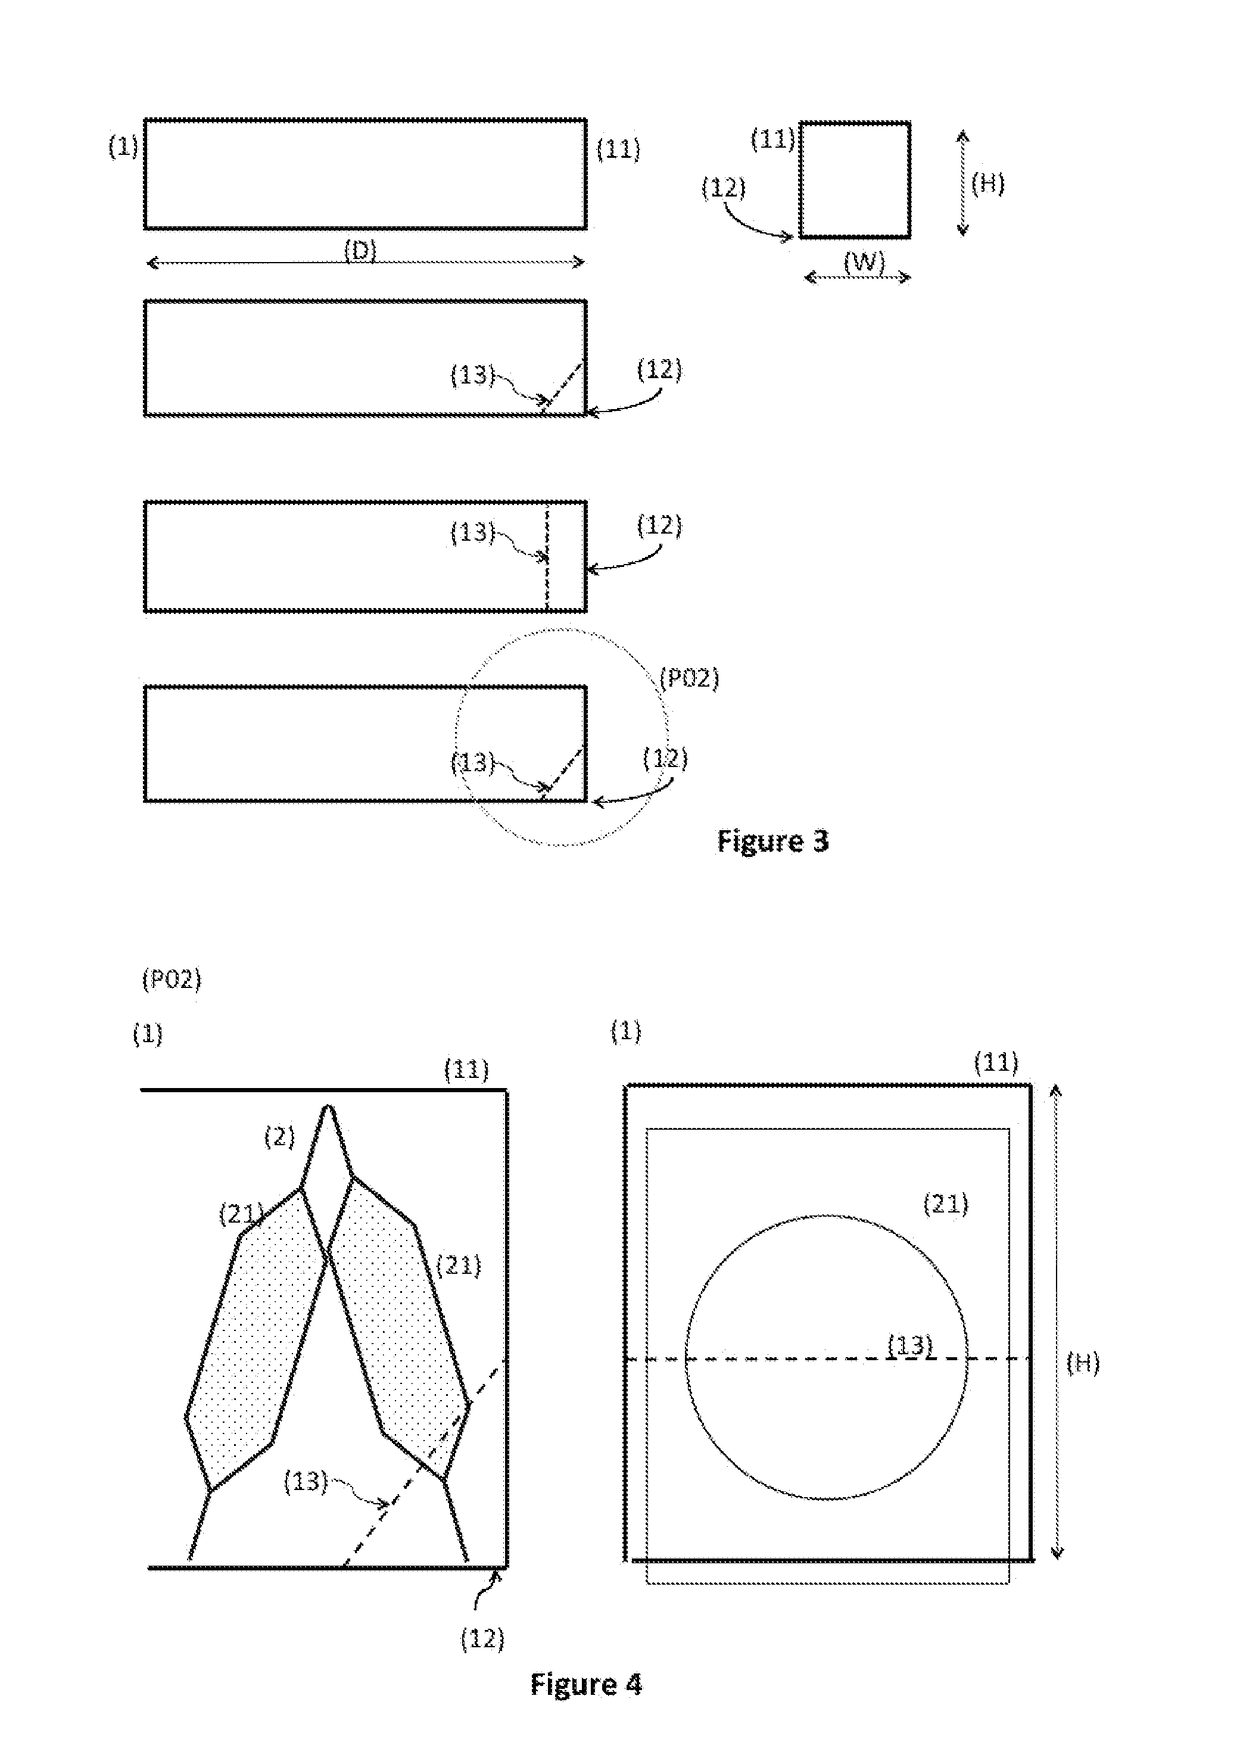 Supply cartridge, machine for preparing beverages and process of operation of a machine using said supply cartridge